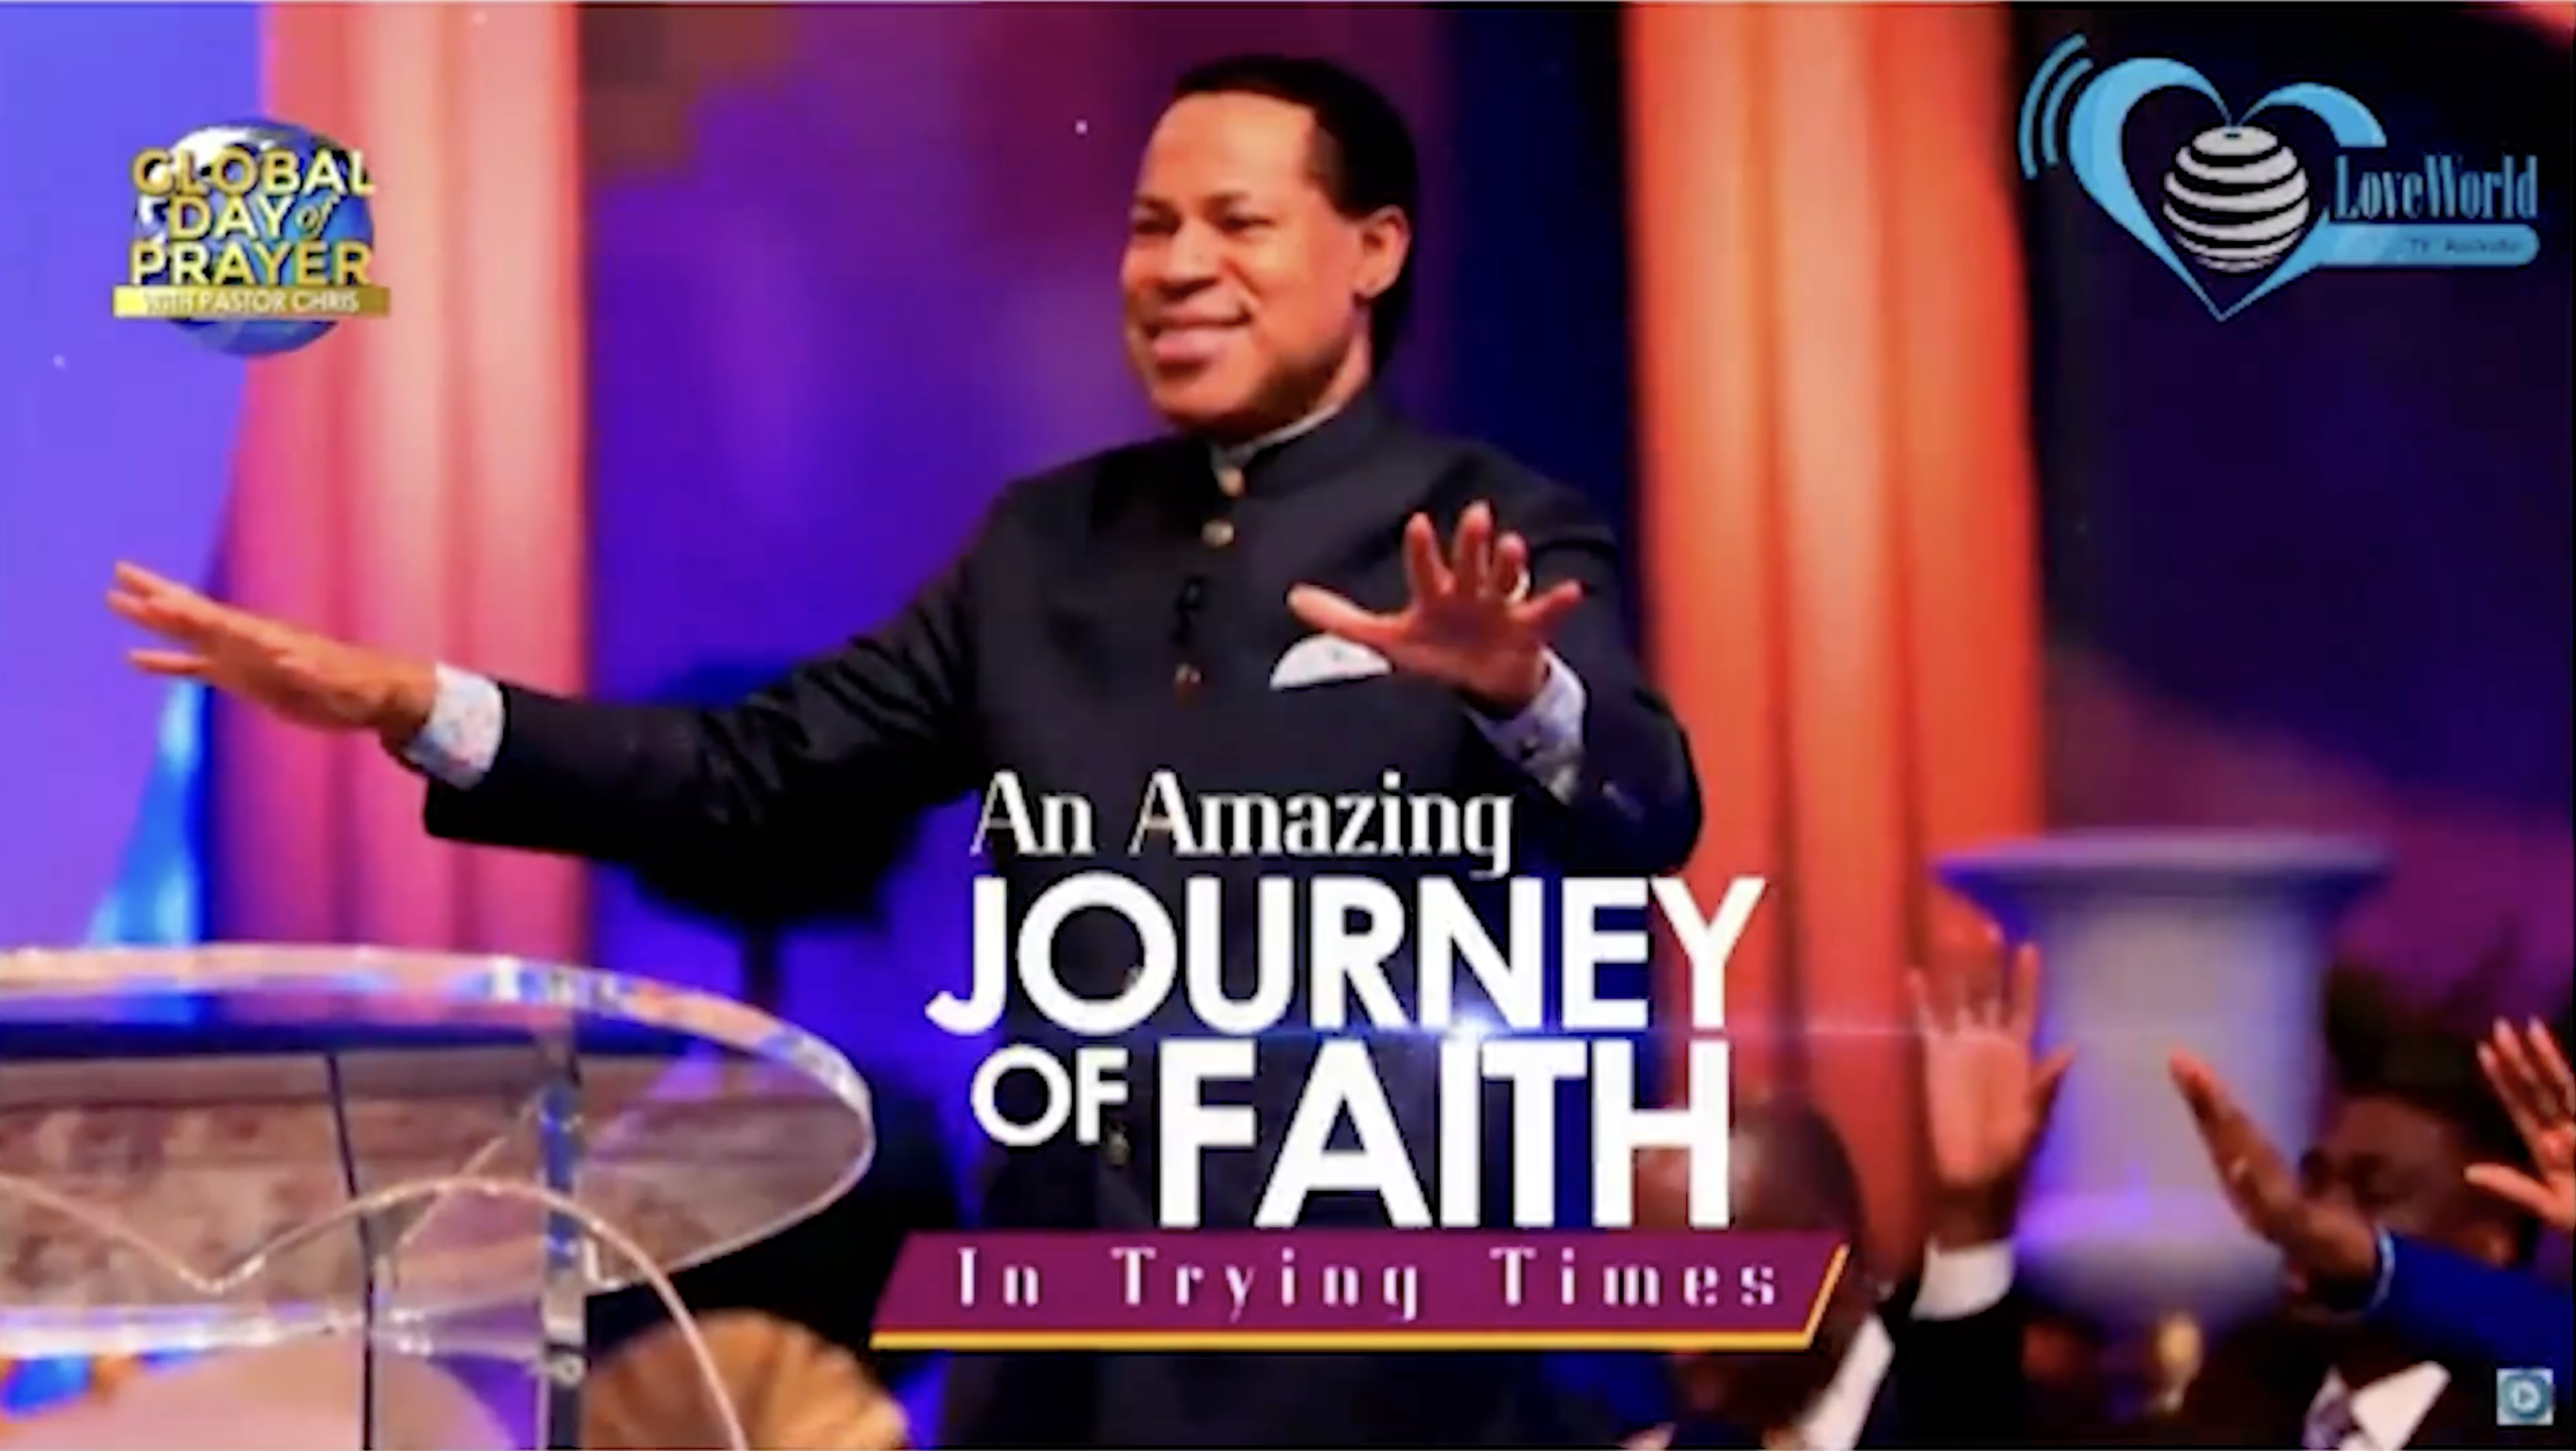 An Amazing Journey of Faith in Trying Times